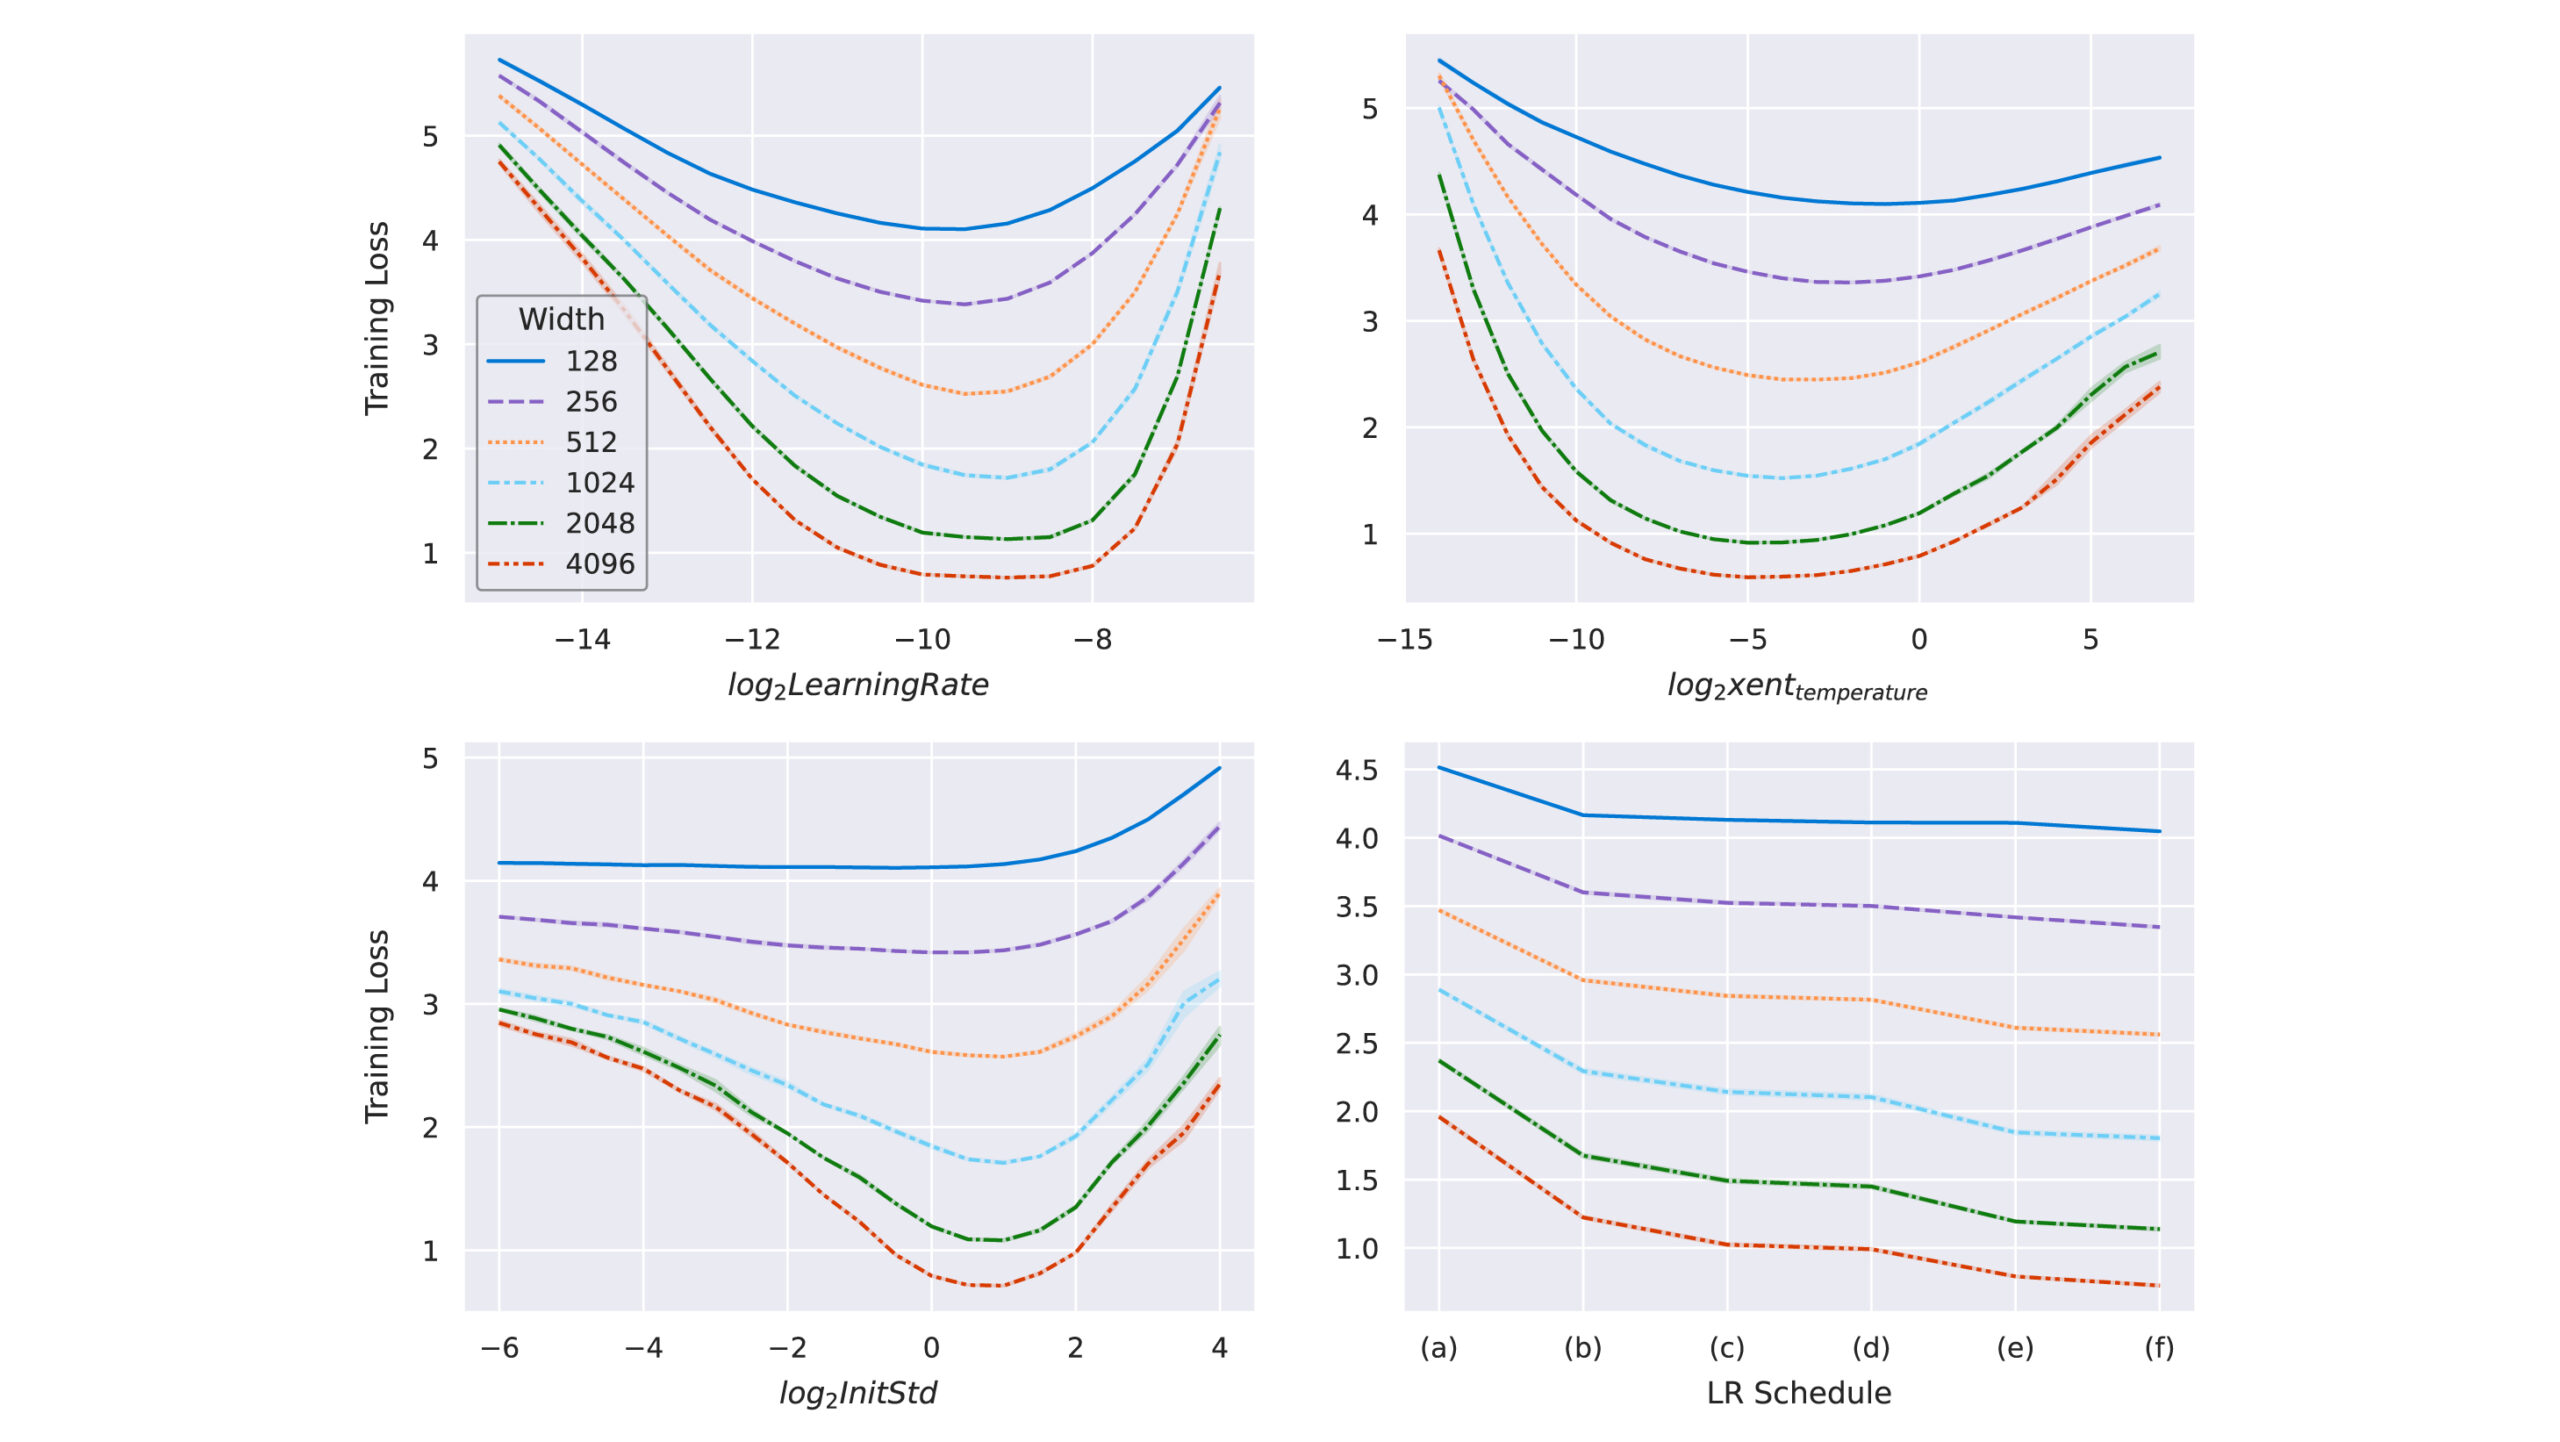 Four line-plots showing the stability of optima of various hyperparameters across widths. From left-to-right and top-to-bottom, we see that the optima for learning rate, cross-entropy temperature, initialization standard deviation, and learning rate schedule are all roughly stable across widths, from 128 to 4,096. 